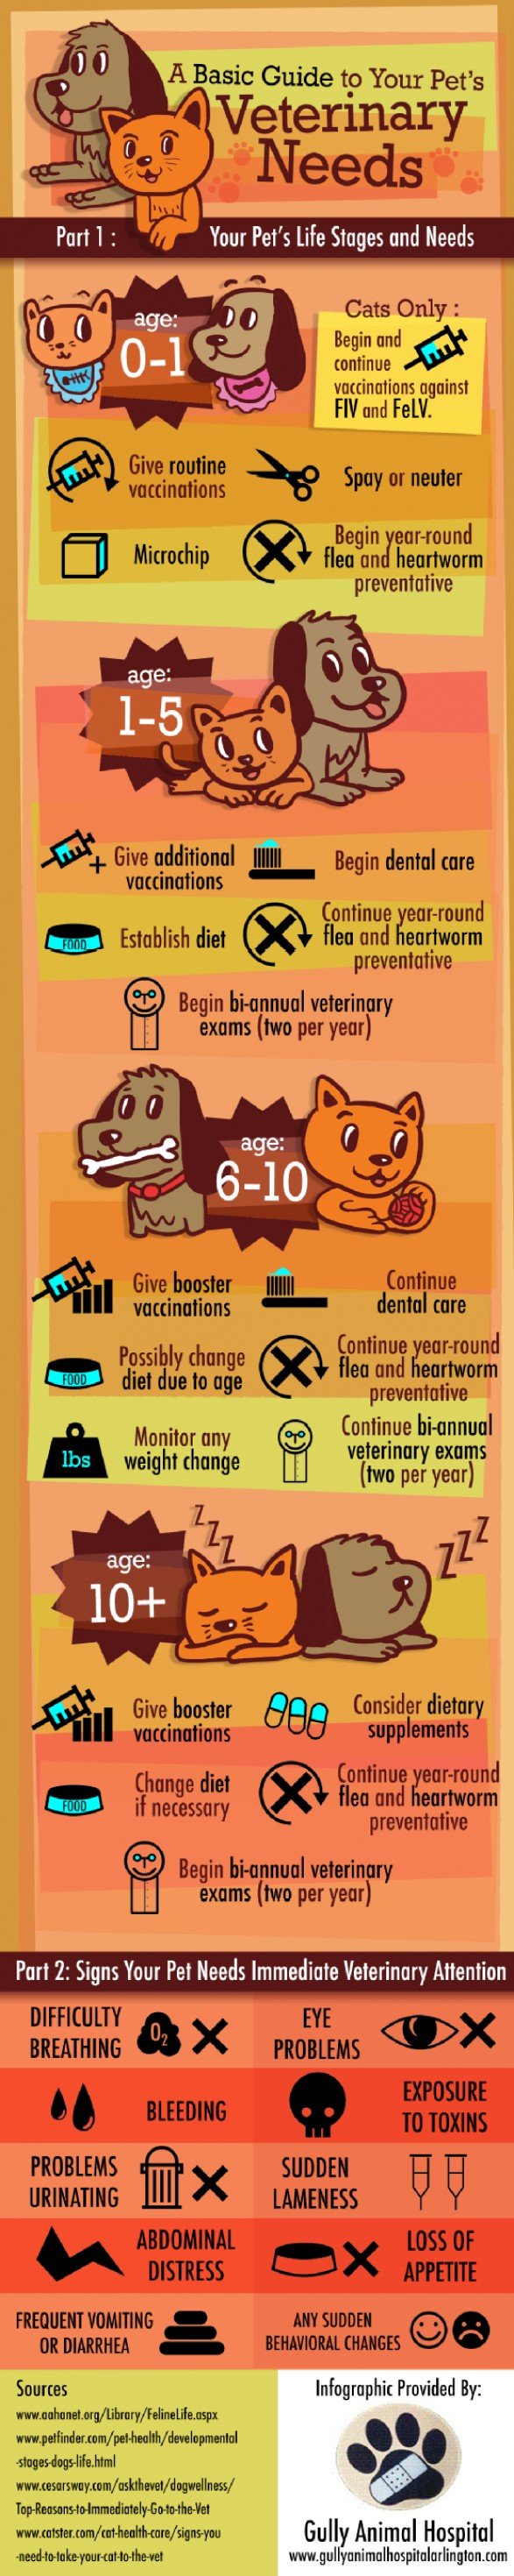 A Basic Guide to Your Pet